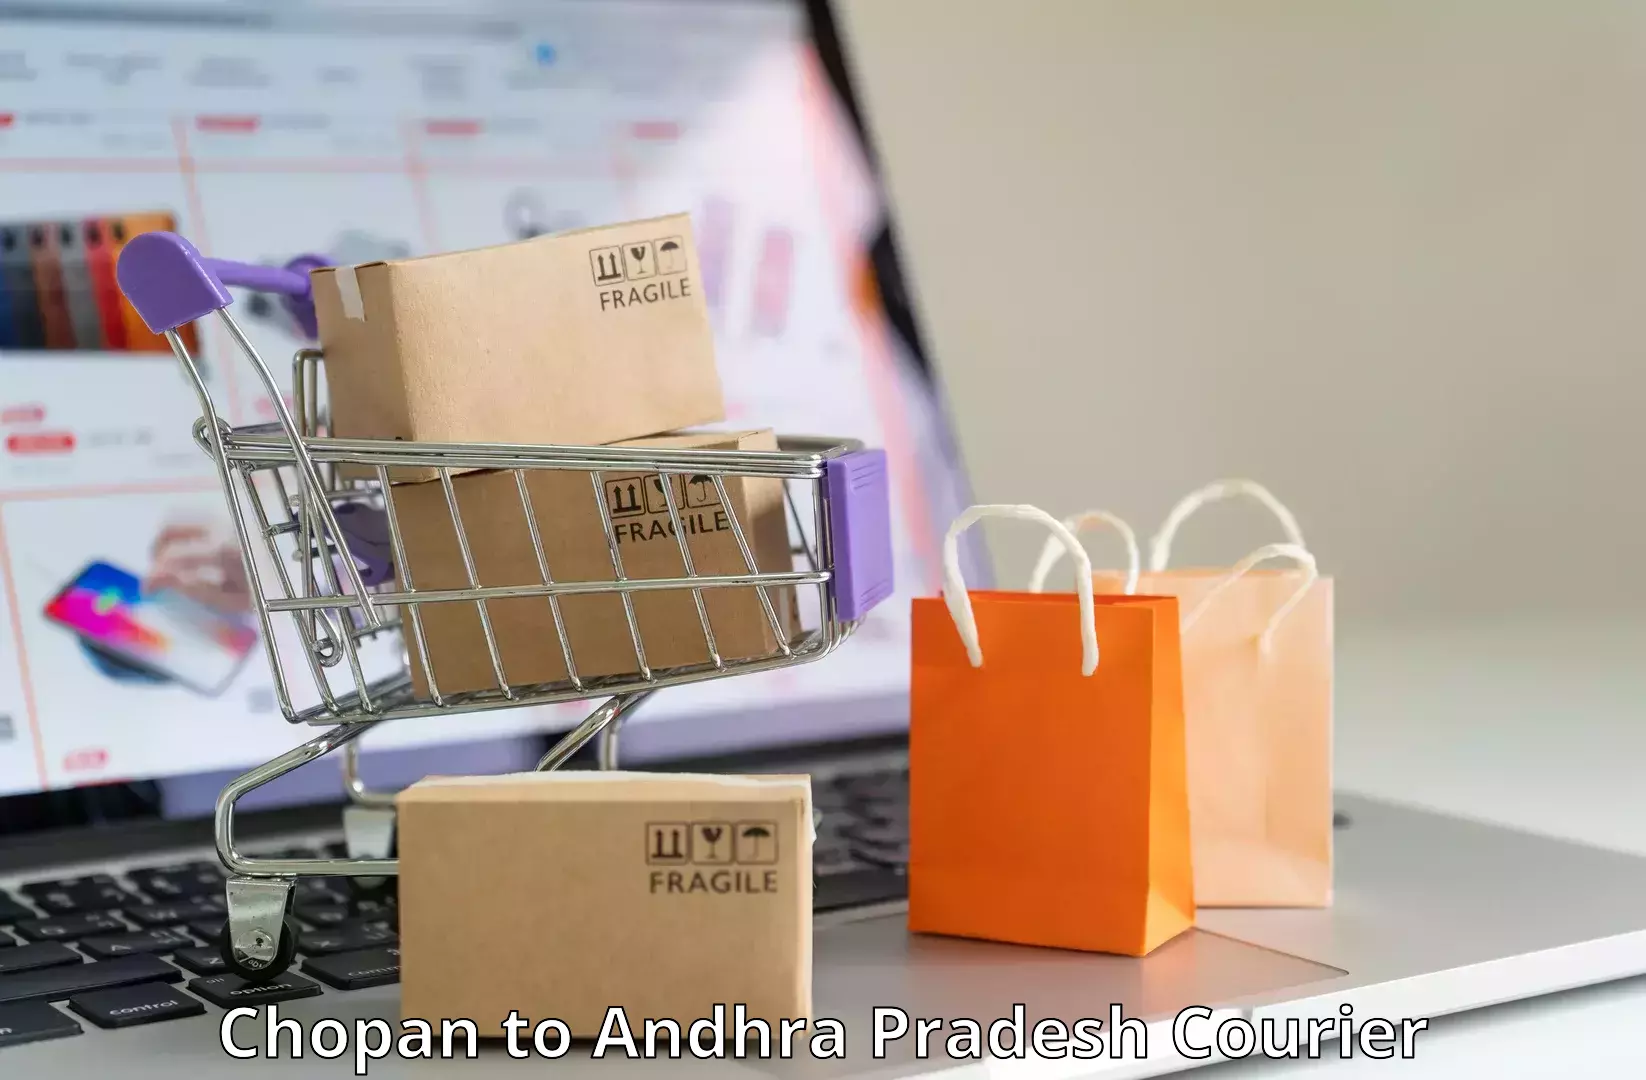 Cash on delivery service Chopan to Anantapur